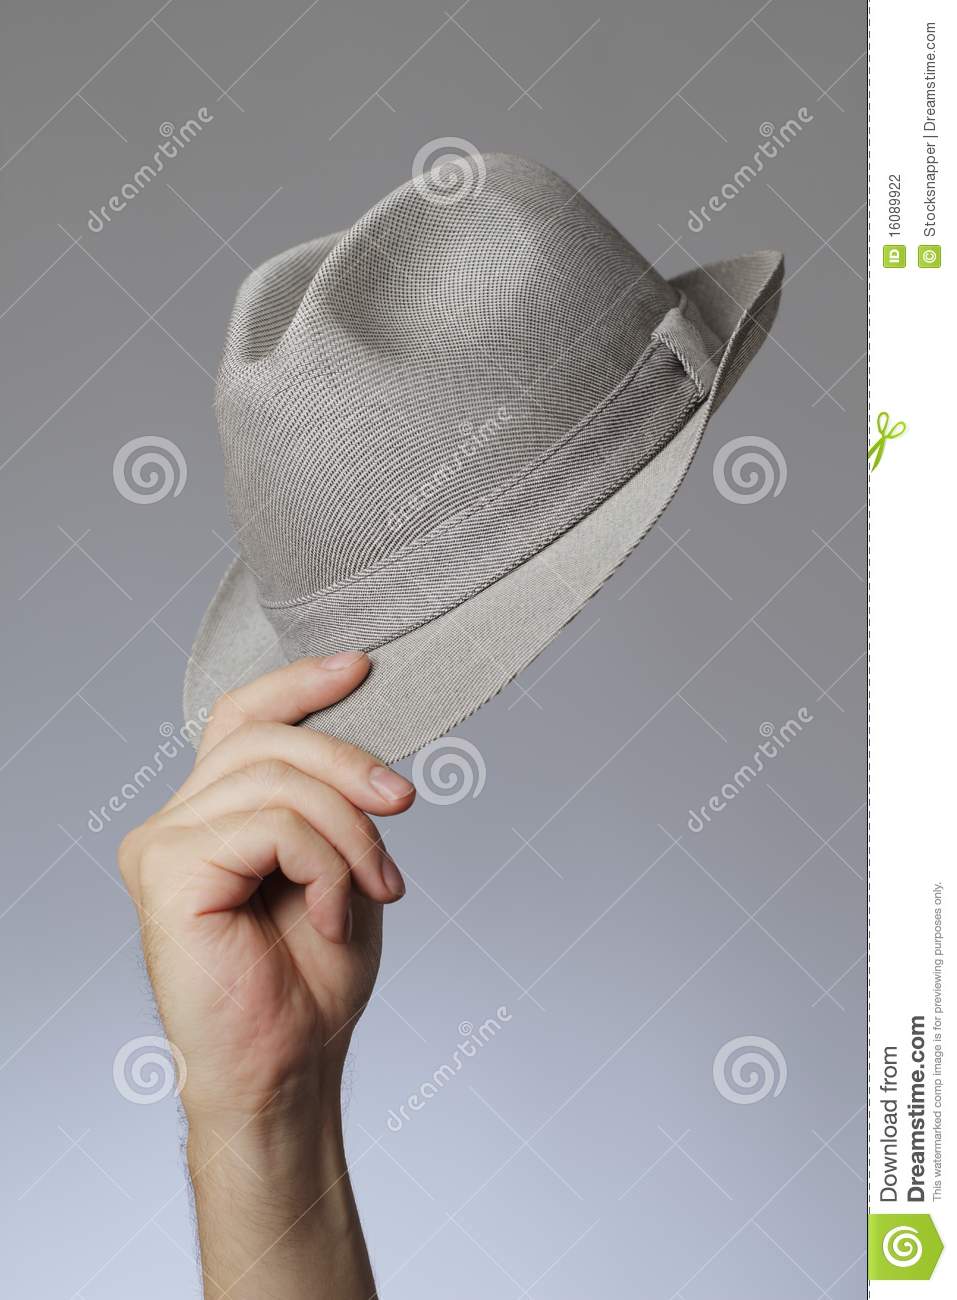 Hats Off Stock Photography   Image  16089922